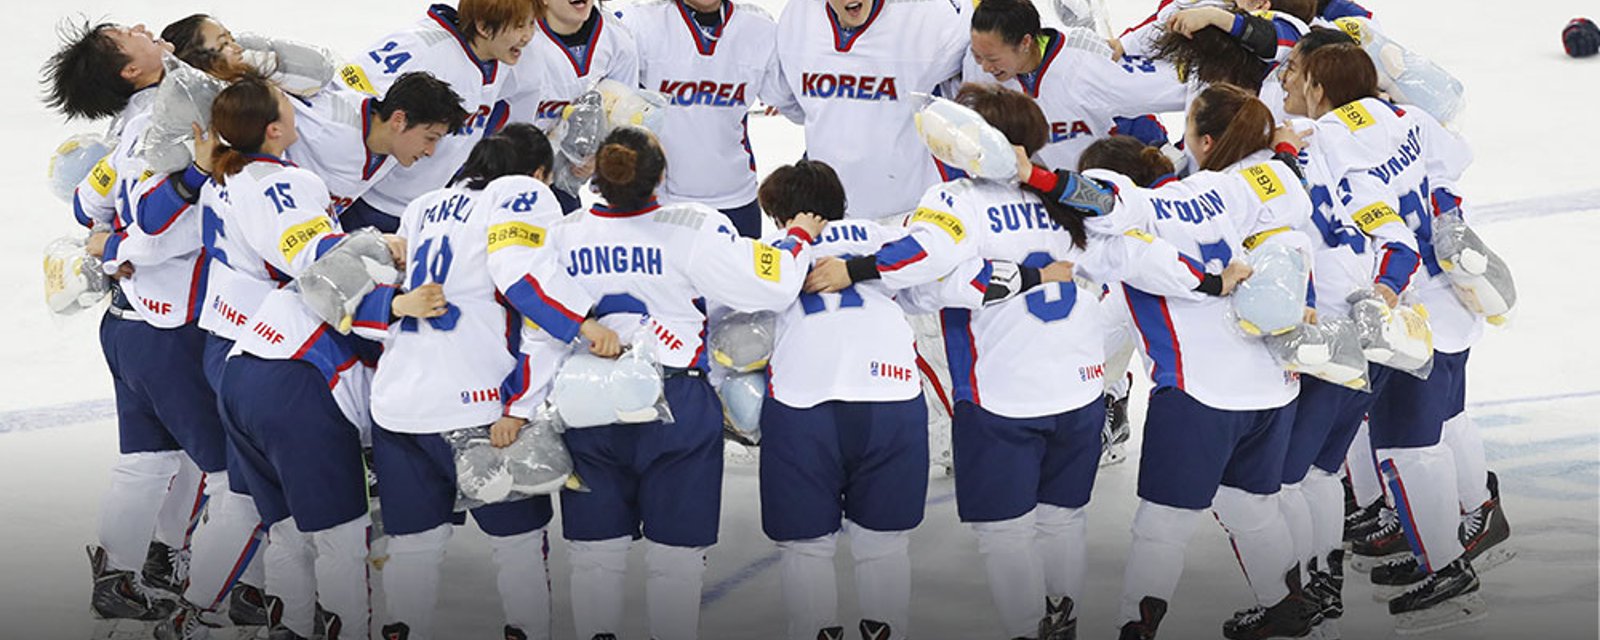 South Korea undeterred by NHL’s stance on Olympics